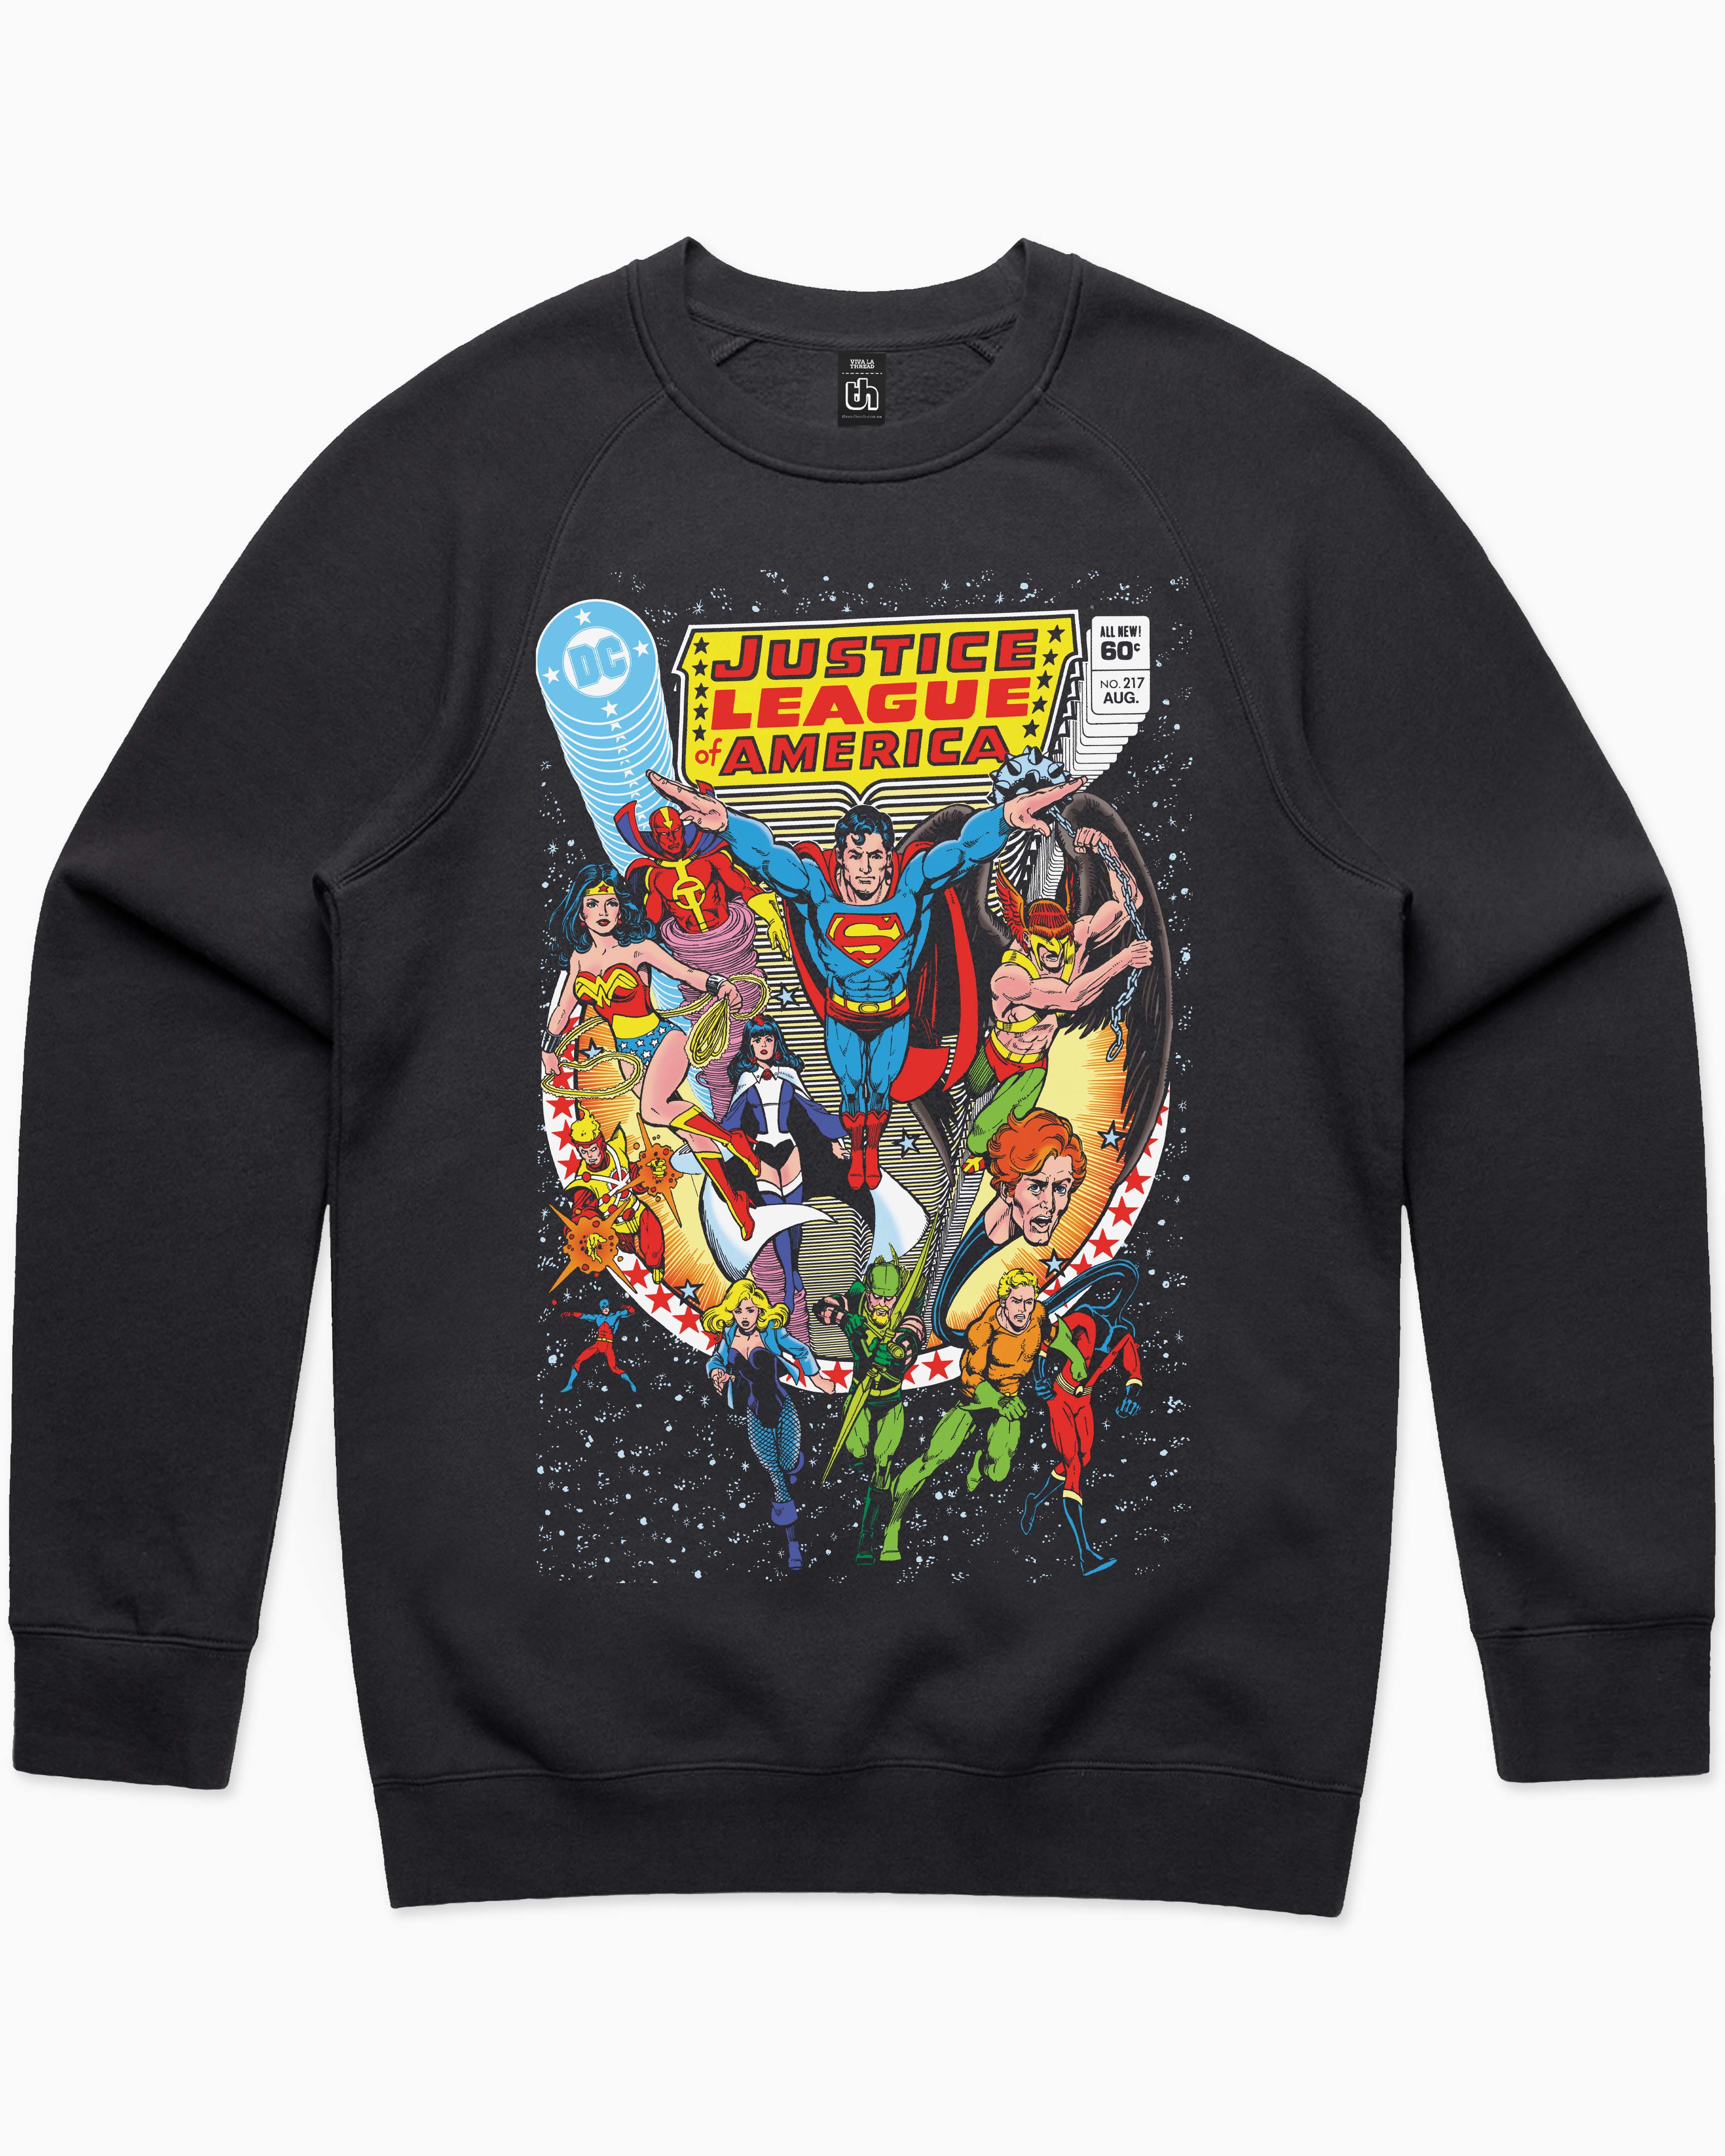 The Justice League of America Jumper